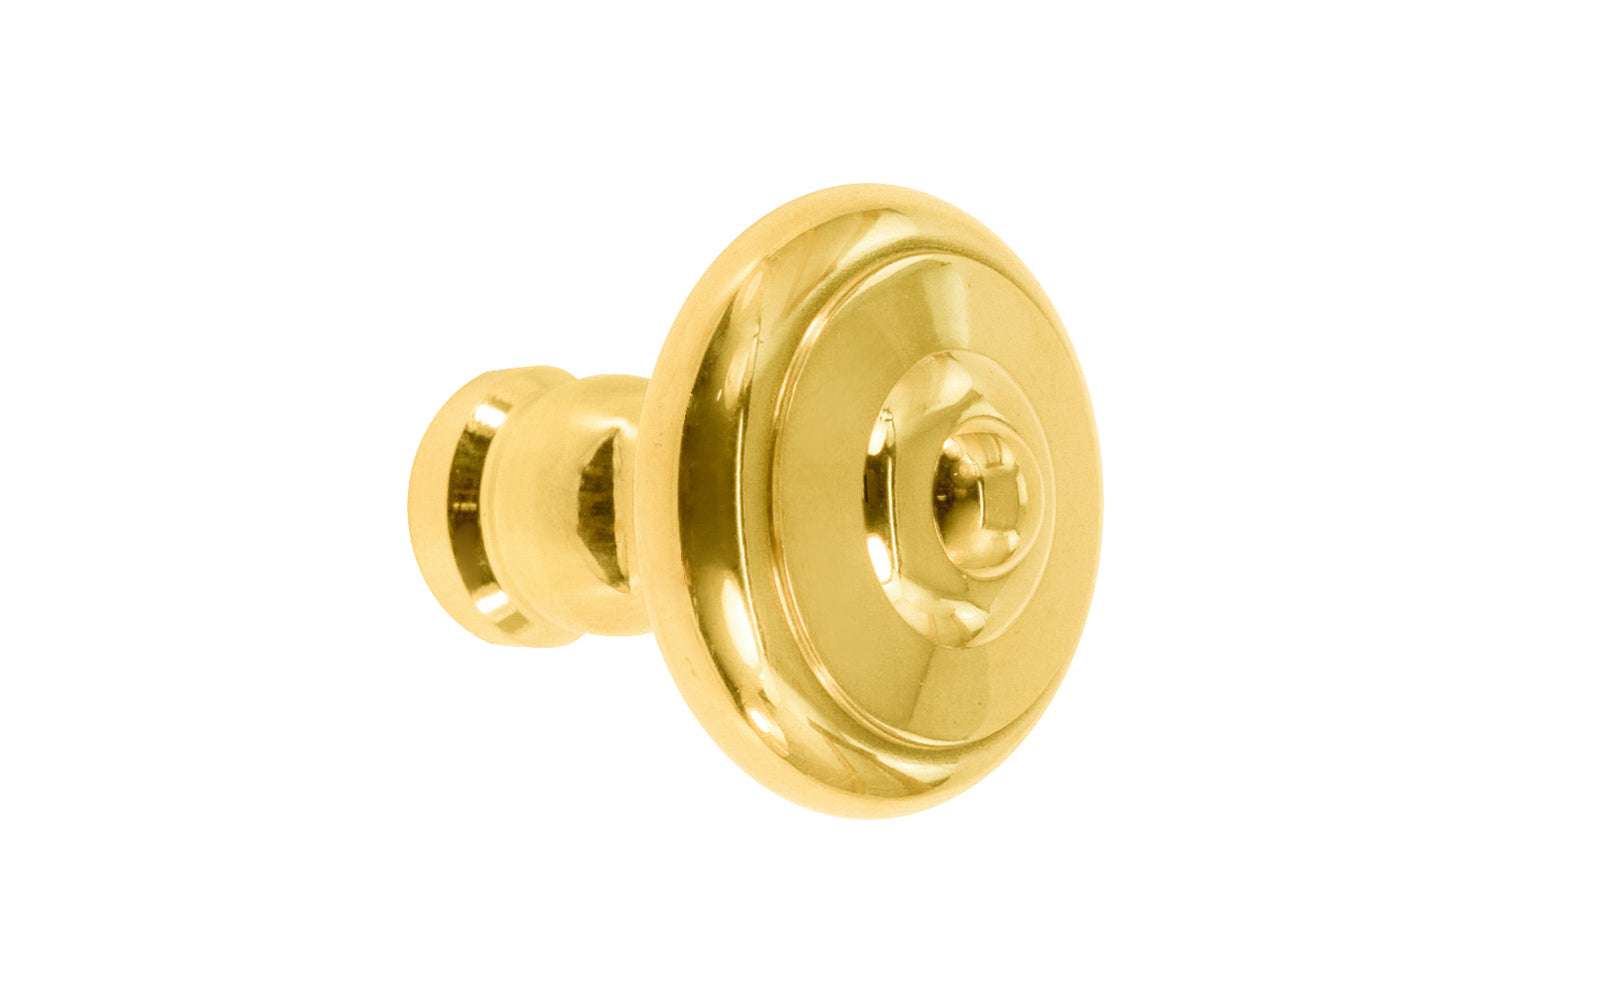 Vintage-style Hardware · Solid Brass classic contemporary style cabinet knob designed in the Mid-Century style. Quality solid brass 1" diameter Knob. Ideal for kitchen & bathroom cabinets, & furniture. Lacquered brass finish.